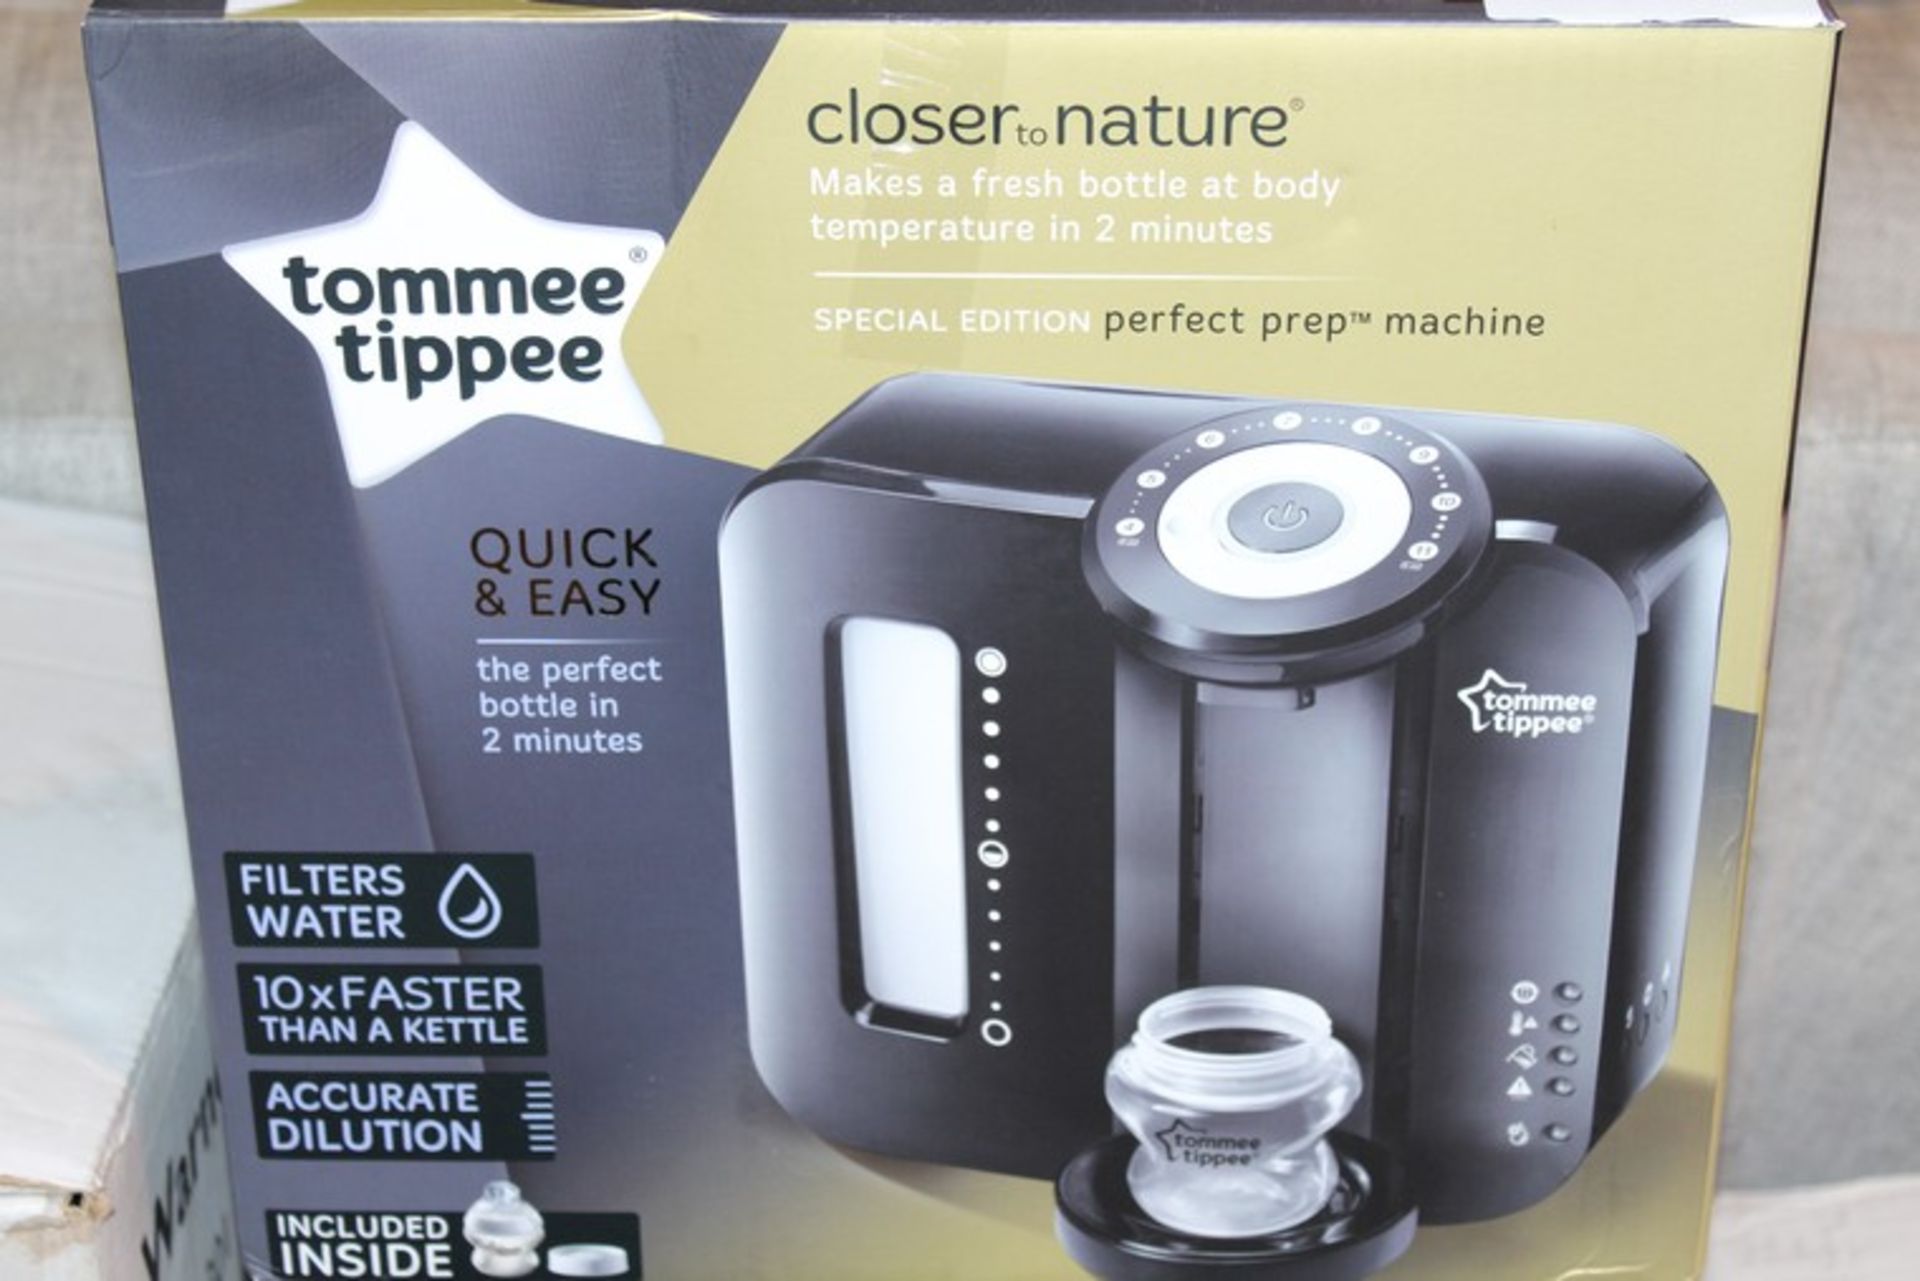 1 x BOXED TOMMEE TIPPEE CLOSER TO NATURE ELECTRIC STEAM STERILISER (17.10.17) *PLEASE NOTE THAT